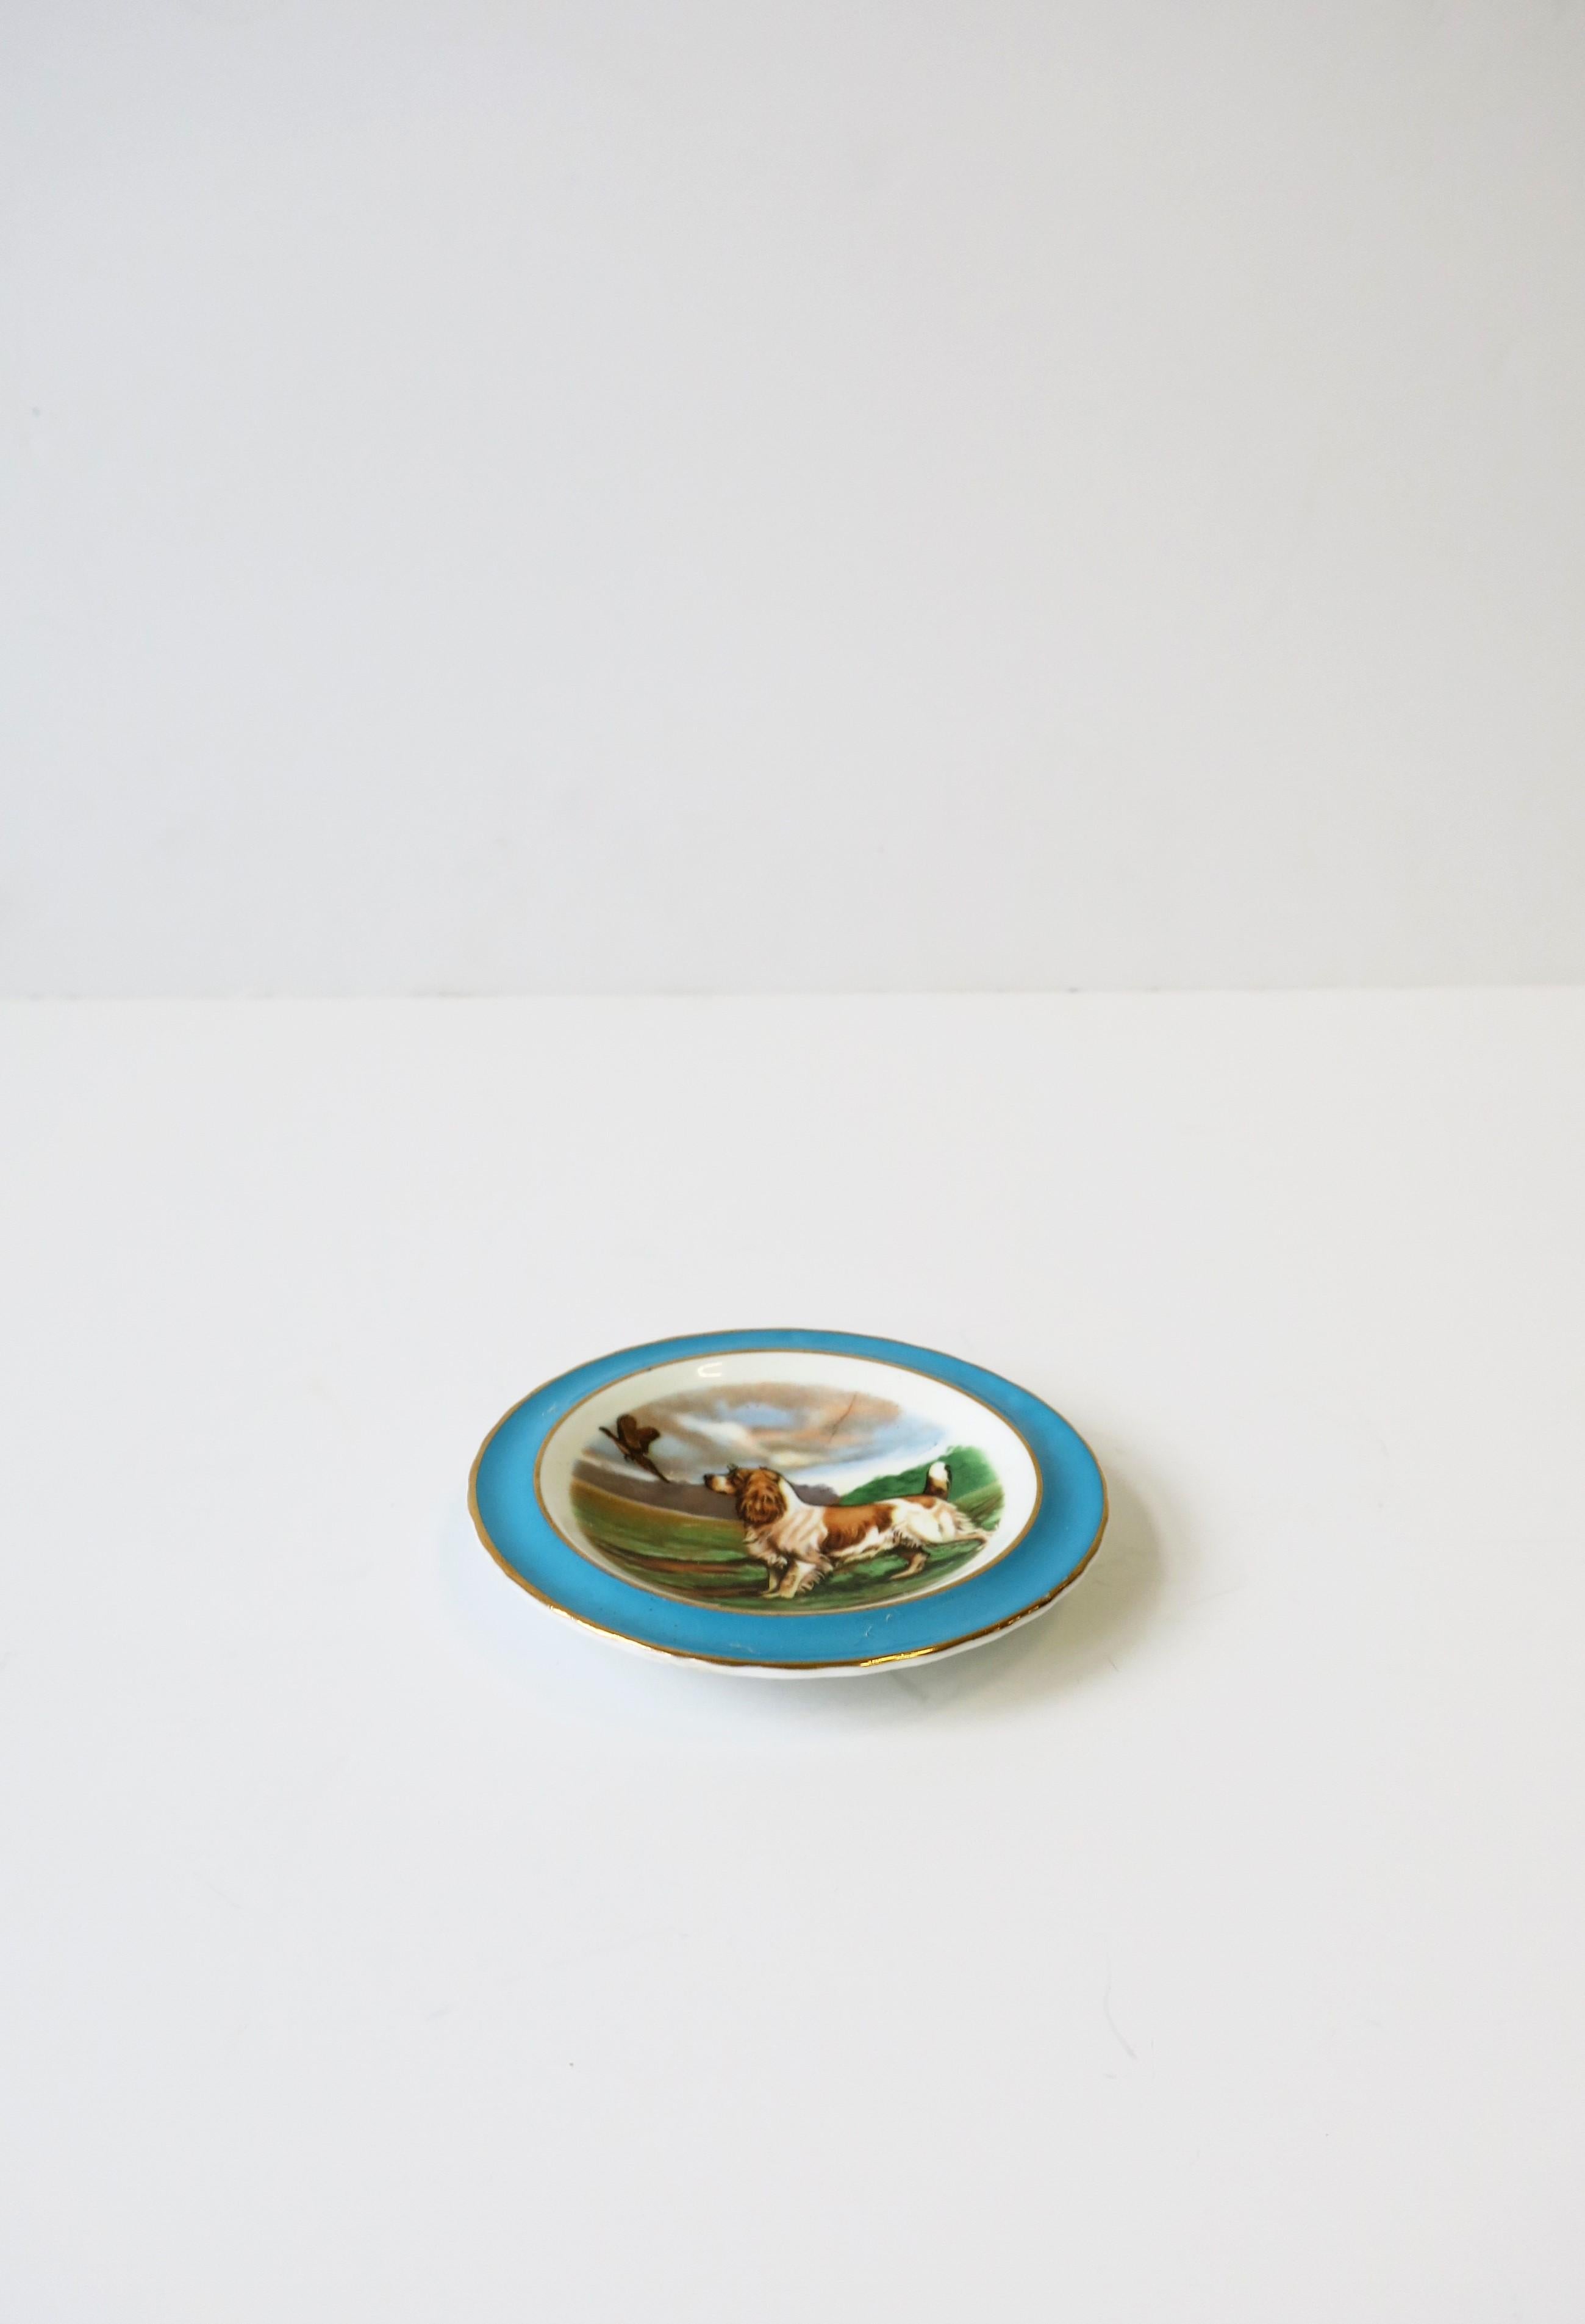 English Blue and White Porcelain Jewelry Dish with Spaniel Dog and Bird 3